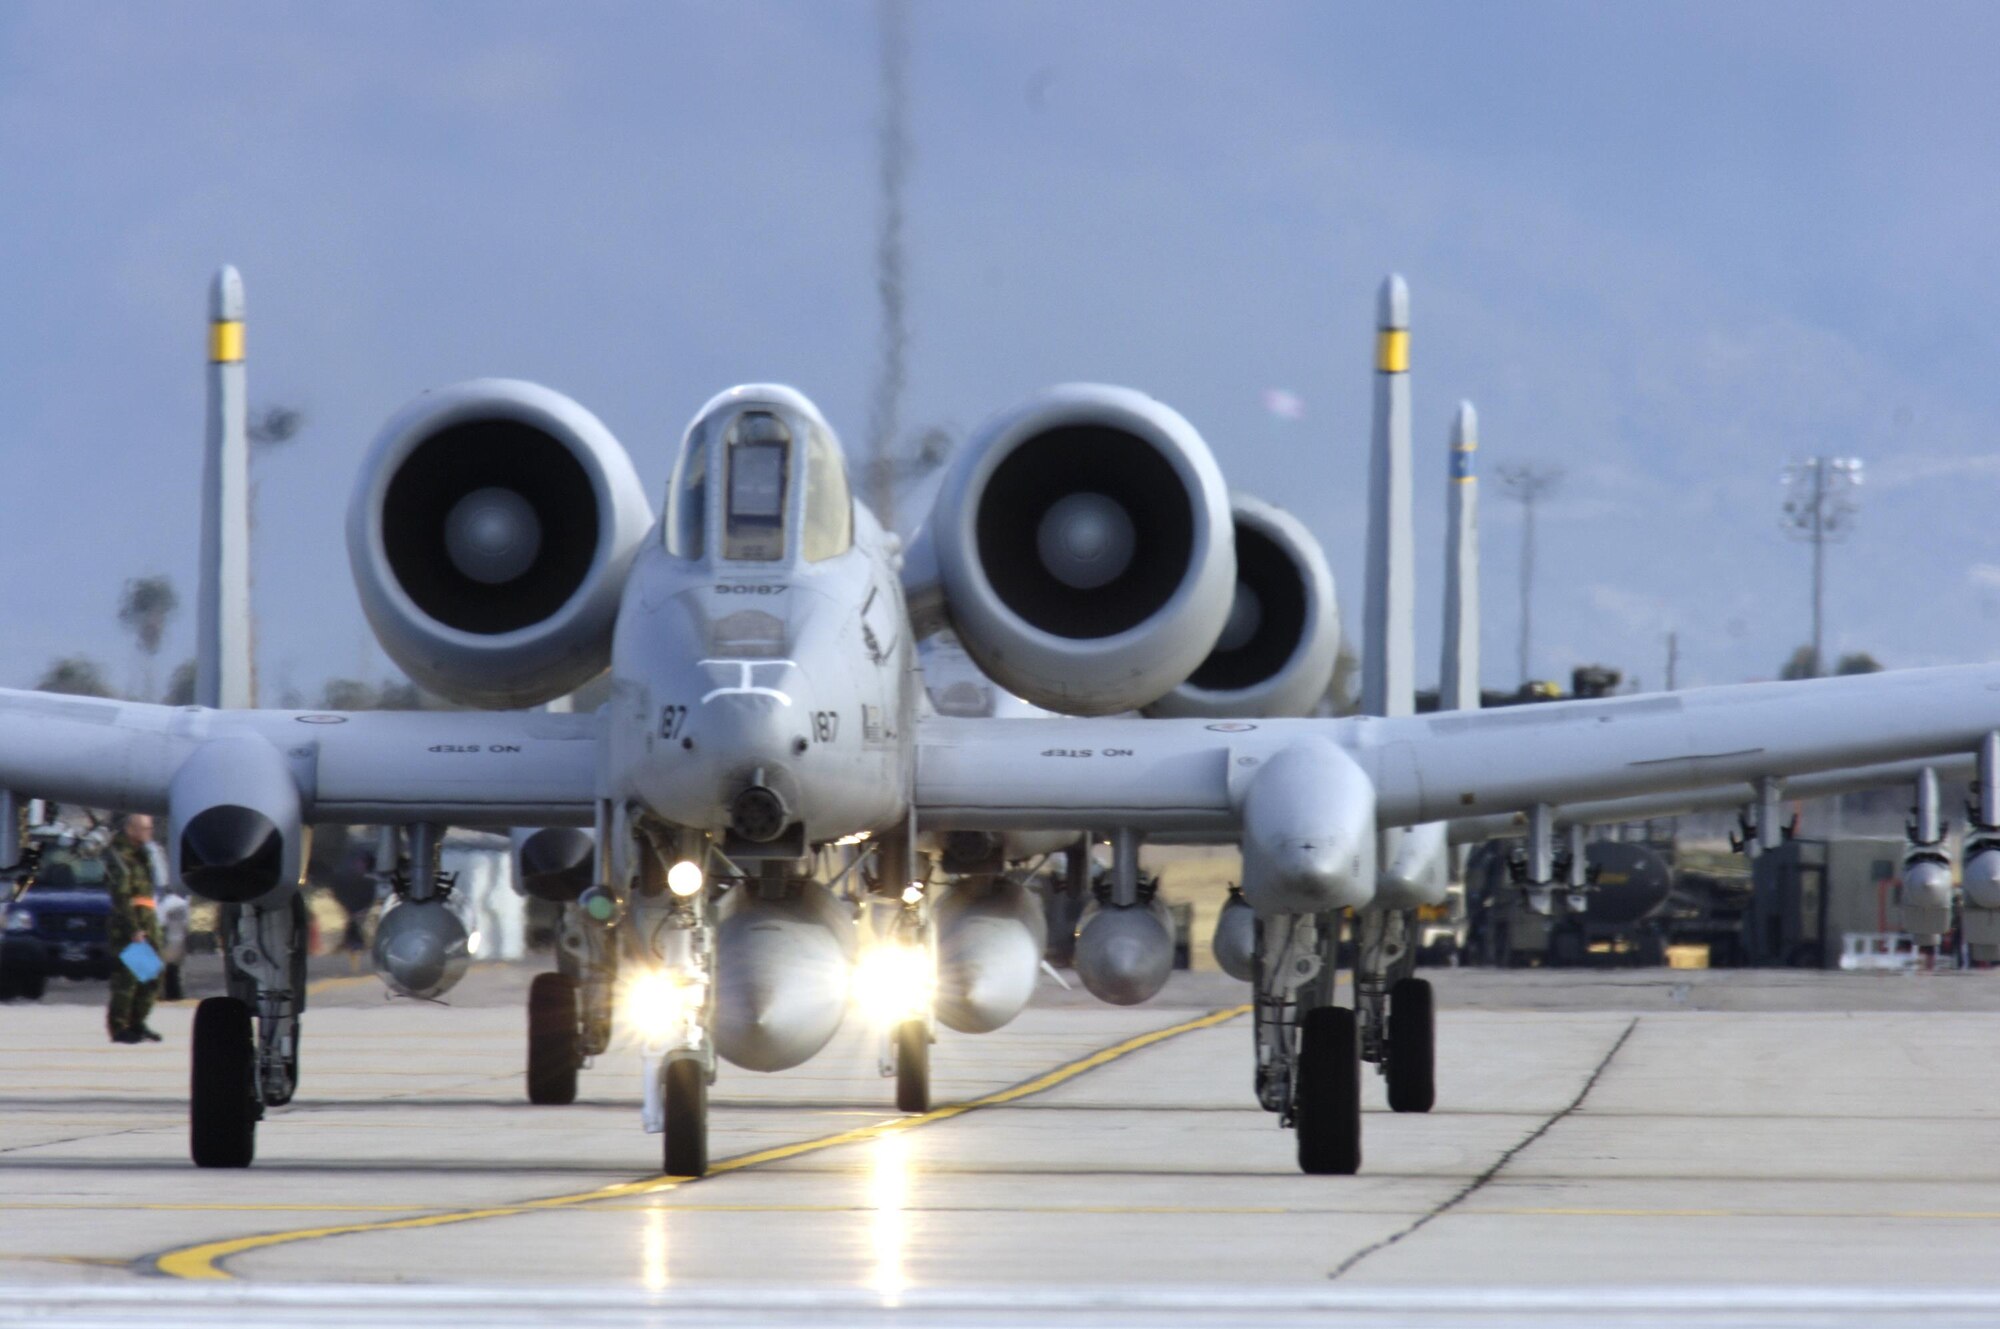 Pilots from the 354th Fighter Squadron taxi down the tarmac preparing to take off in their A-10 Thunderbolt IIs to a simulated deployed location as a part of exercise Bushwhacker 07-02 Jan. 21, 2007, at Davis-Monthan Air Force Base, Arizona. (U.S. Air Force photo/Senior Airman Jesse Shipps)